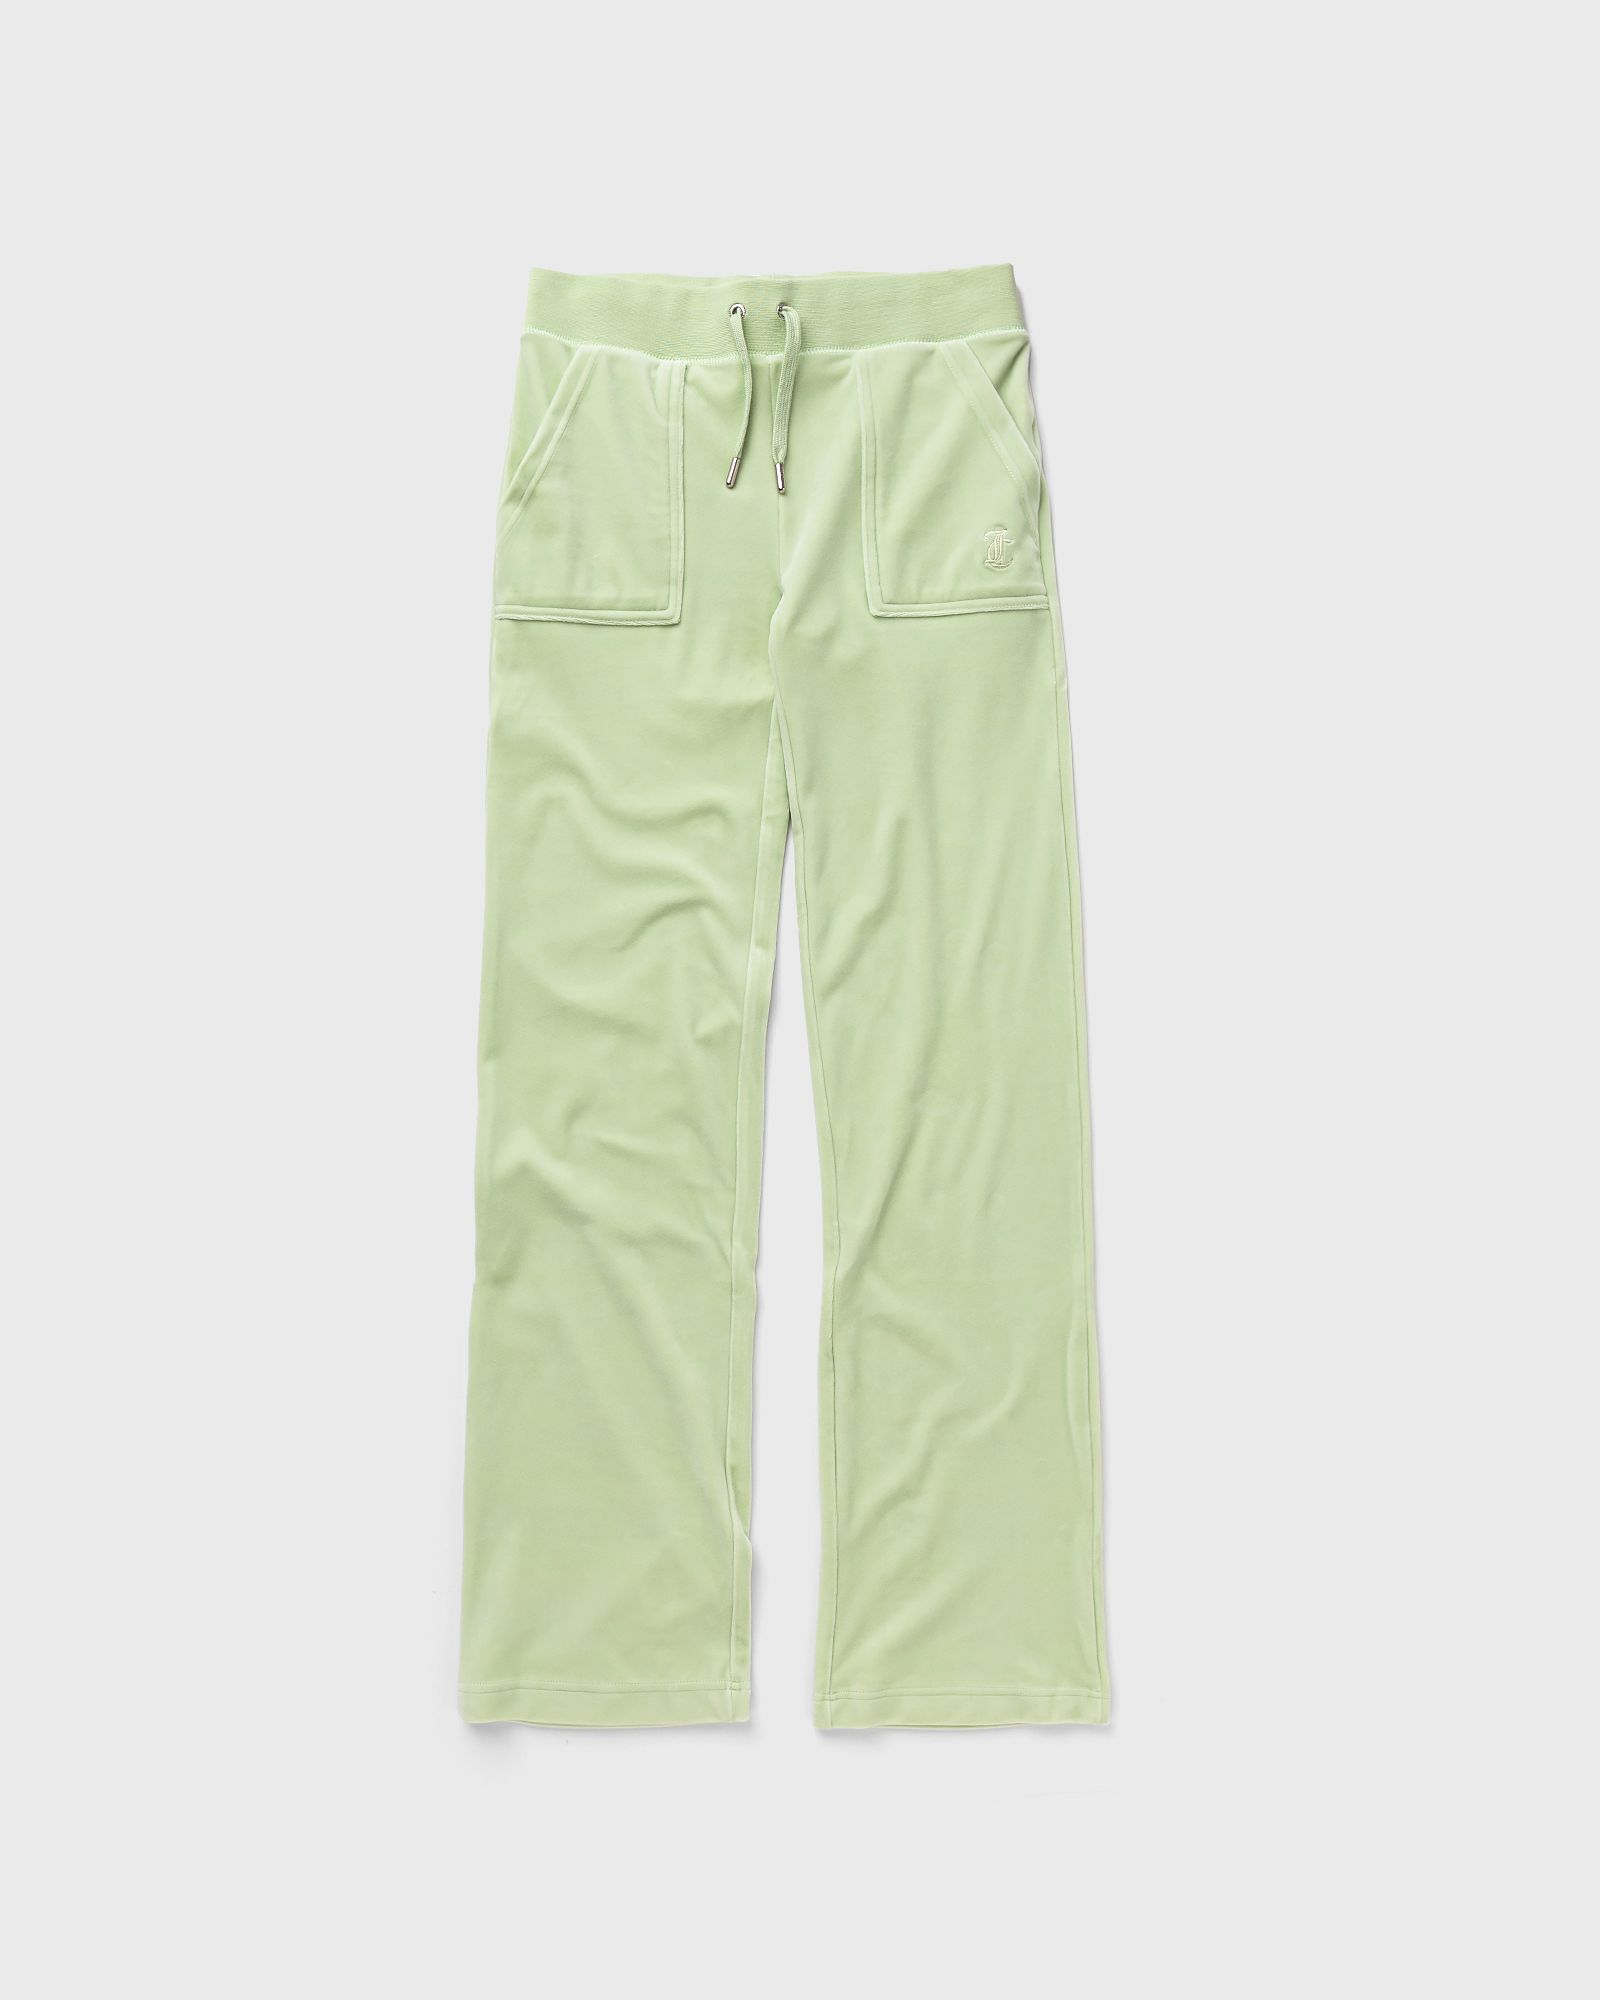 Juicy Couture - wmns classic velour del ray pant women sweatpants green in größe:m